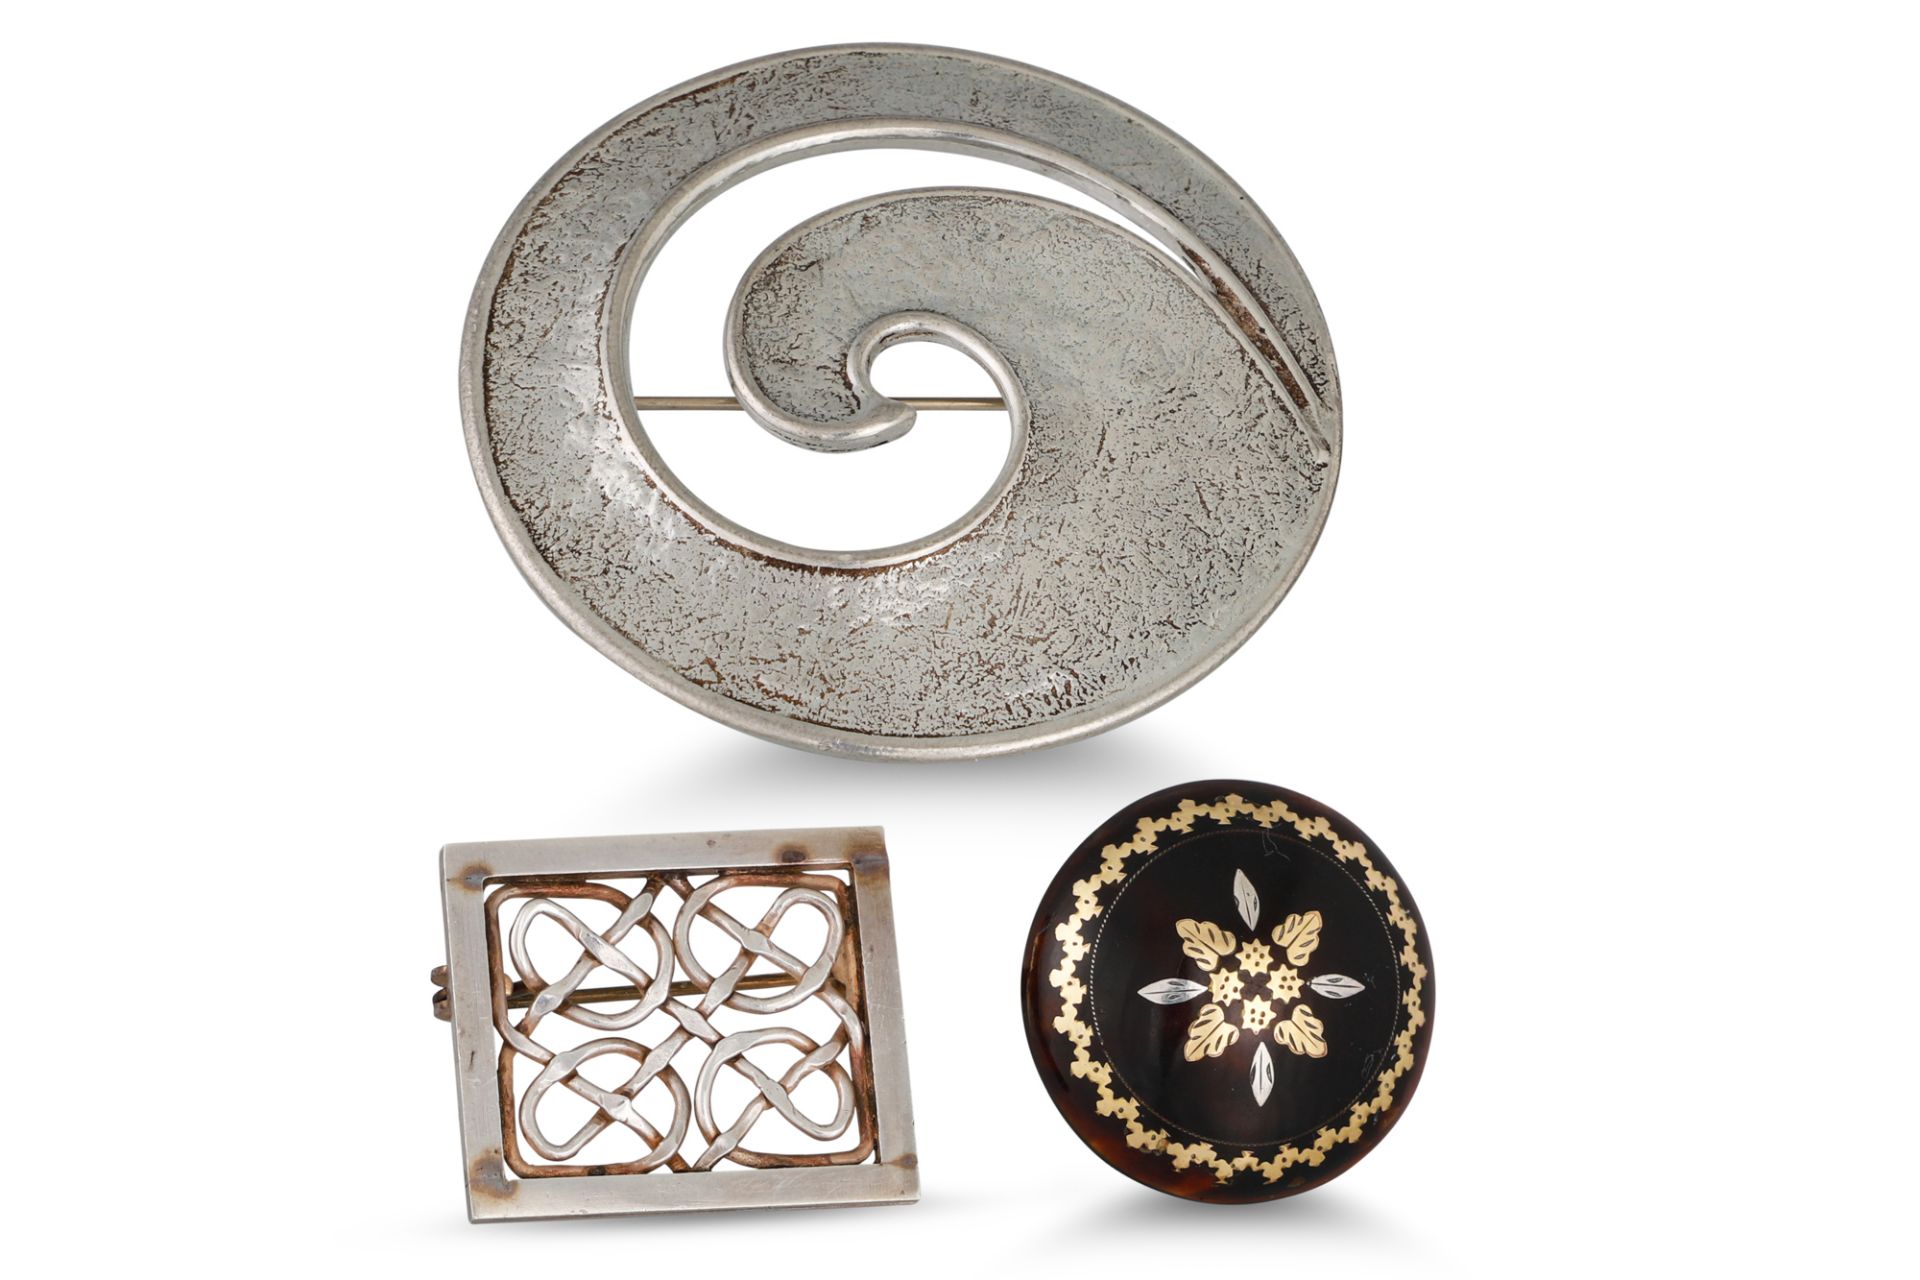 AN ANTIQUE CIRCULAR INLAID TORTOISESHELL BROOCH, together with a Celtic style silver brooch and a